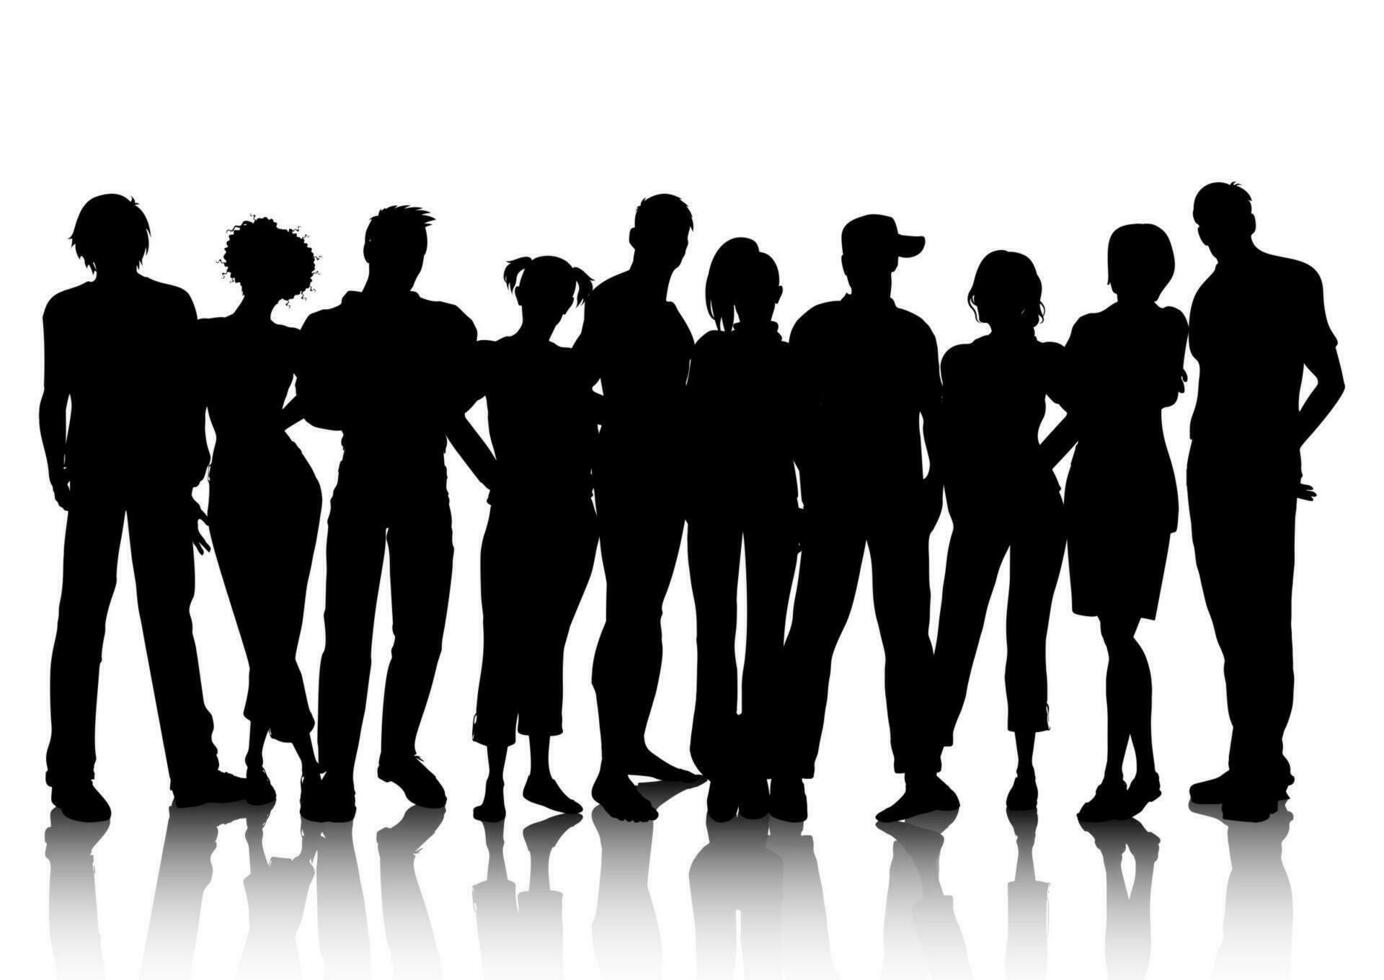 silhouette of a crowd of people vector